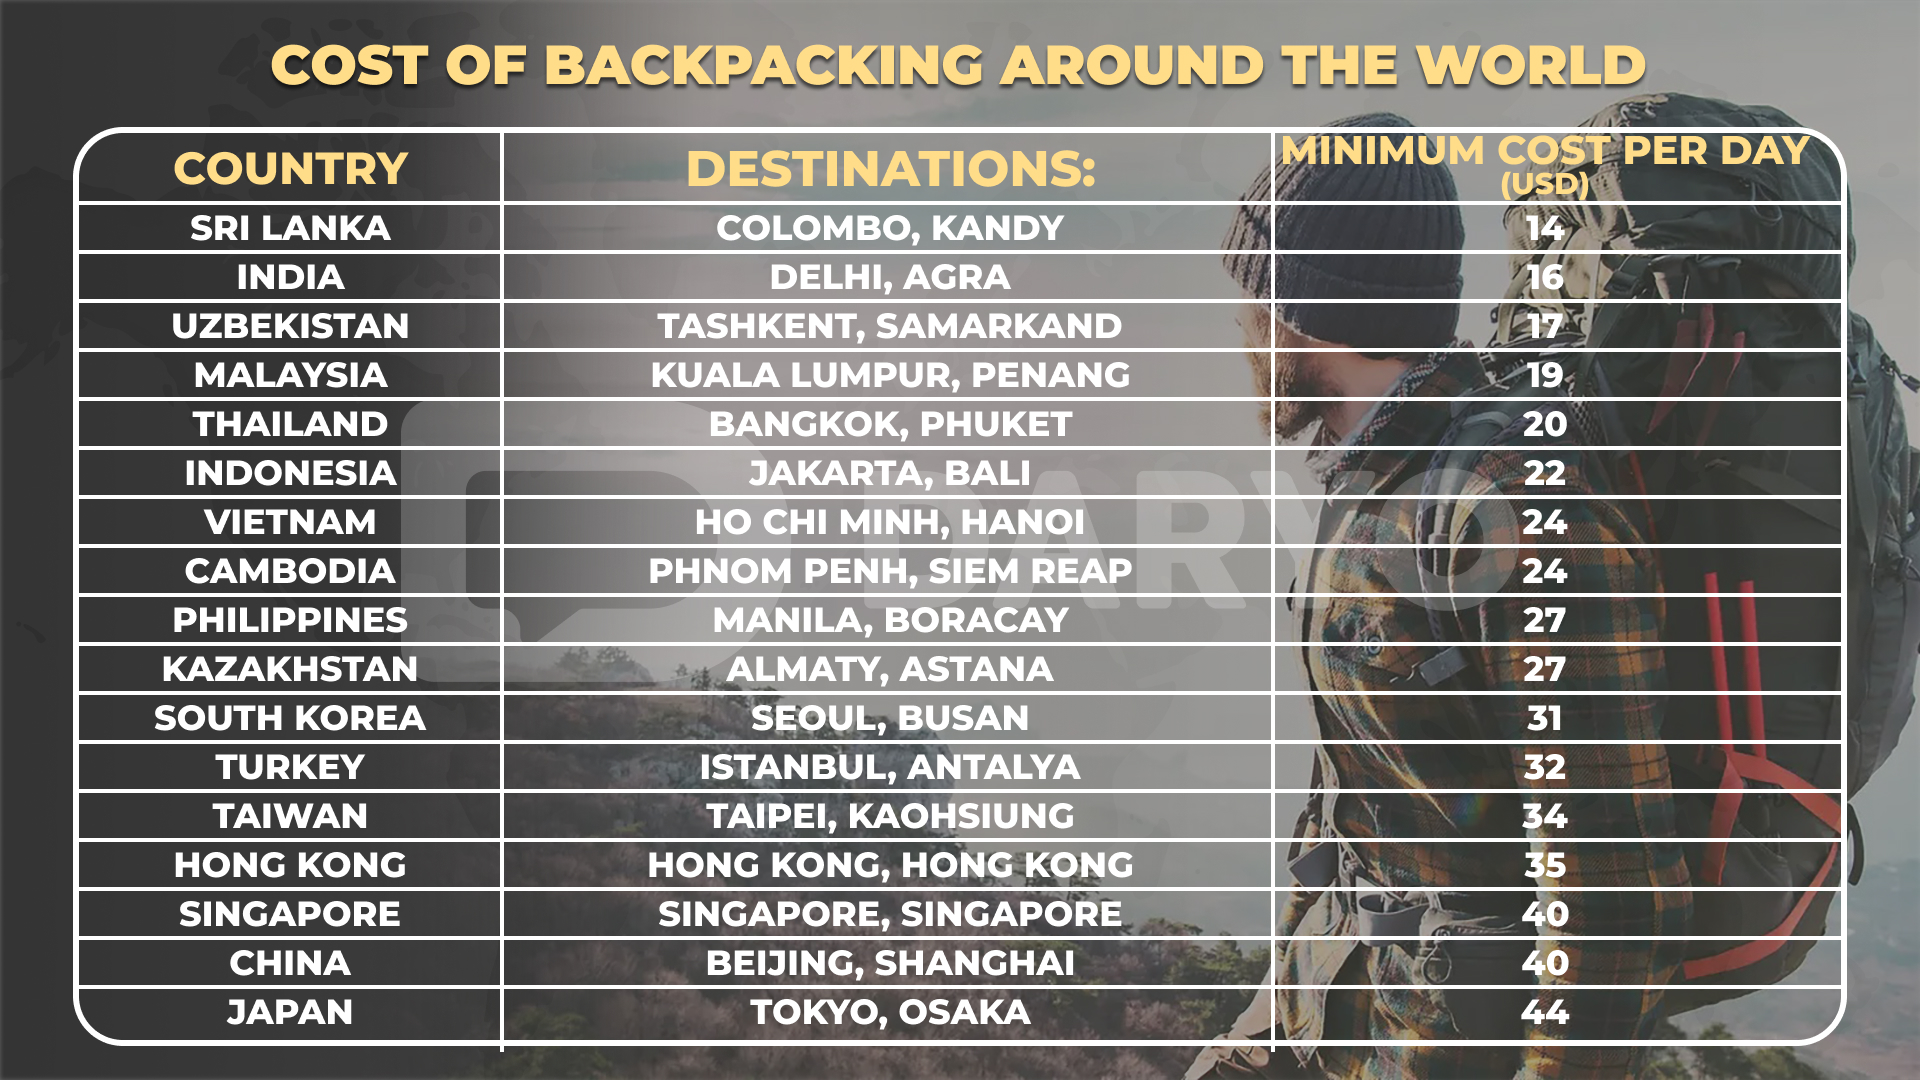 Table showing the cost of one day backpacking in various countries aroudn the world